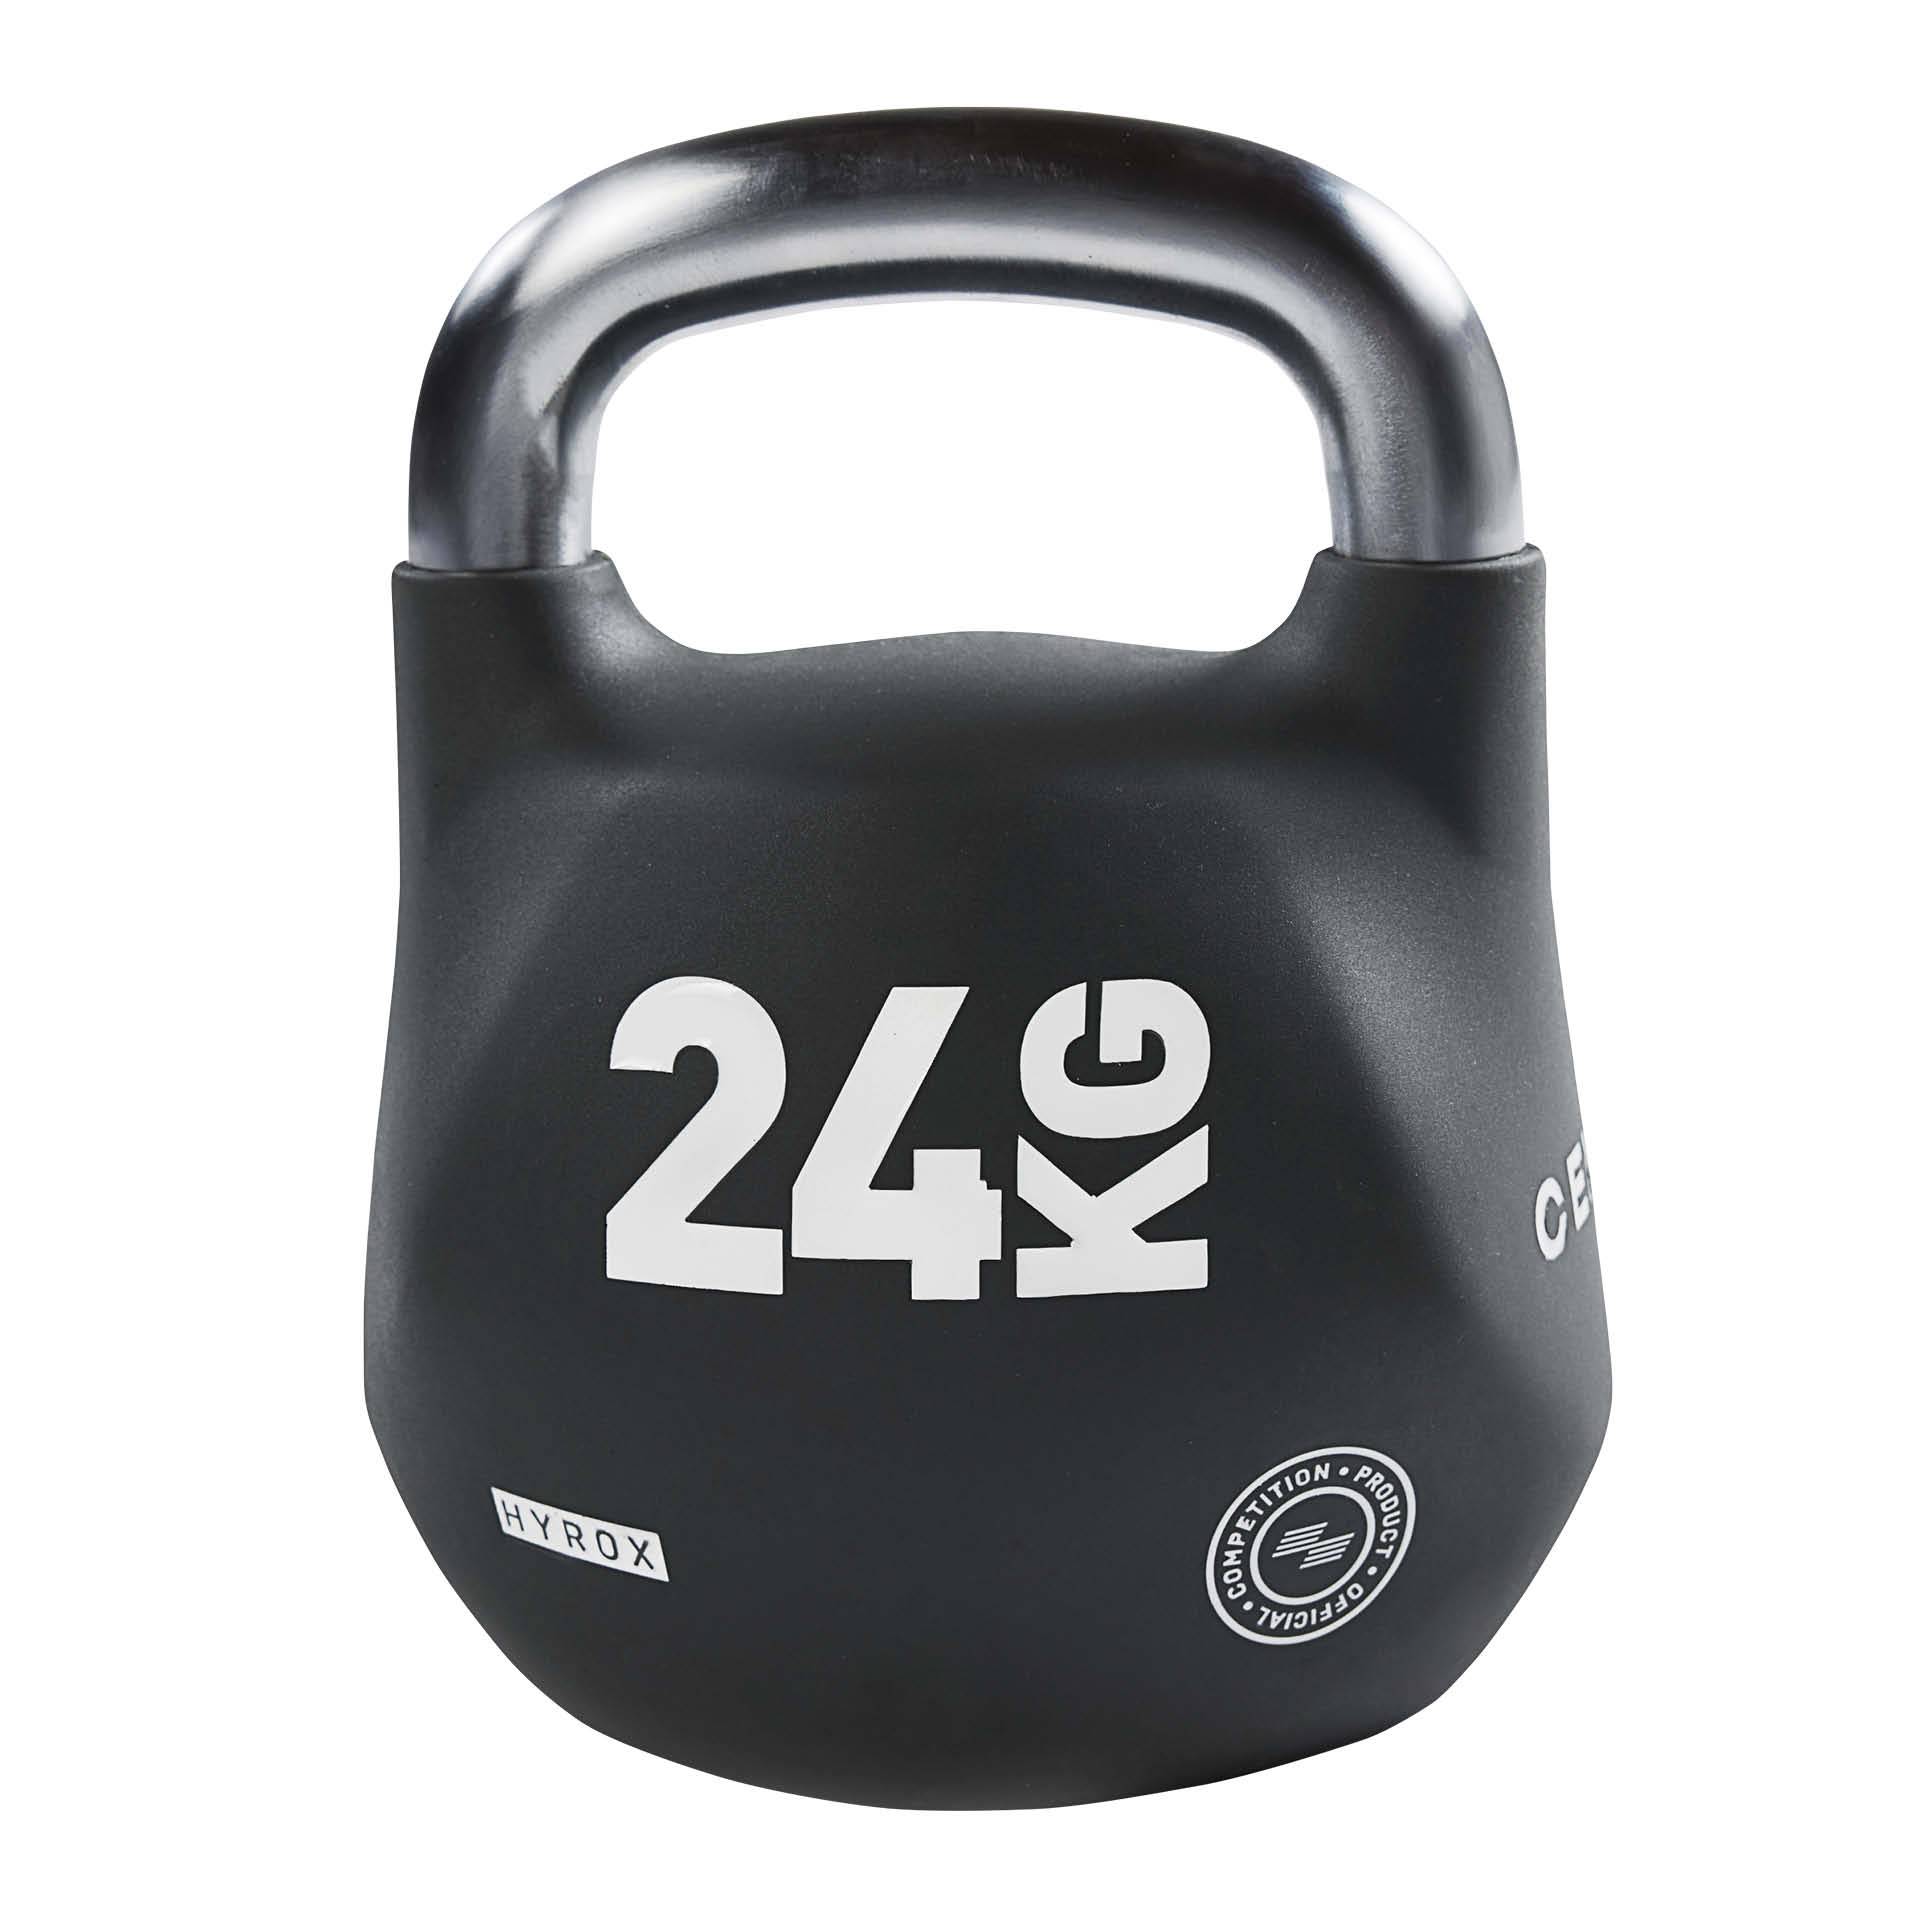 CENTR x HYROX Competition Octo Kettlebell 24 kg von Perform Better